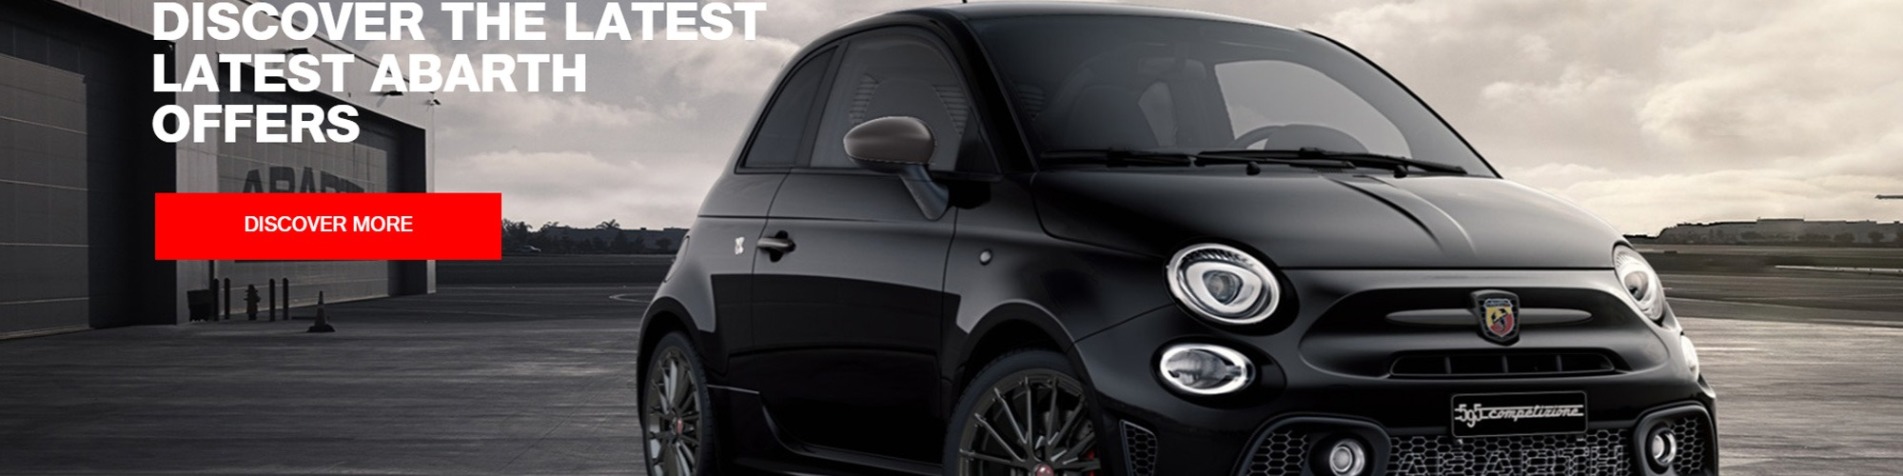 Discover Abarth Offers